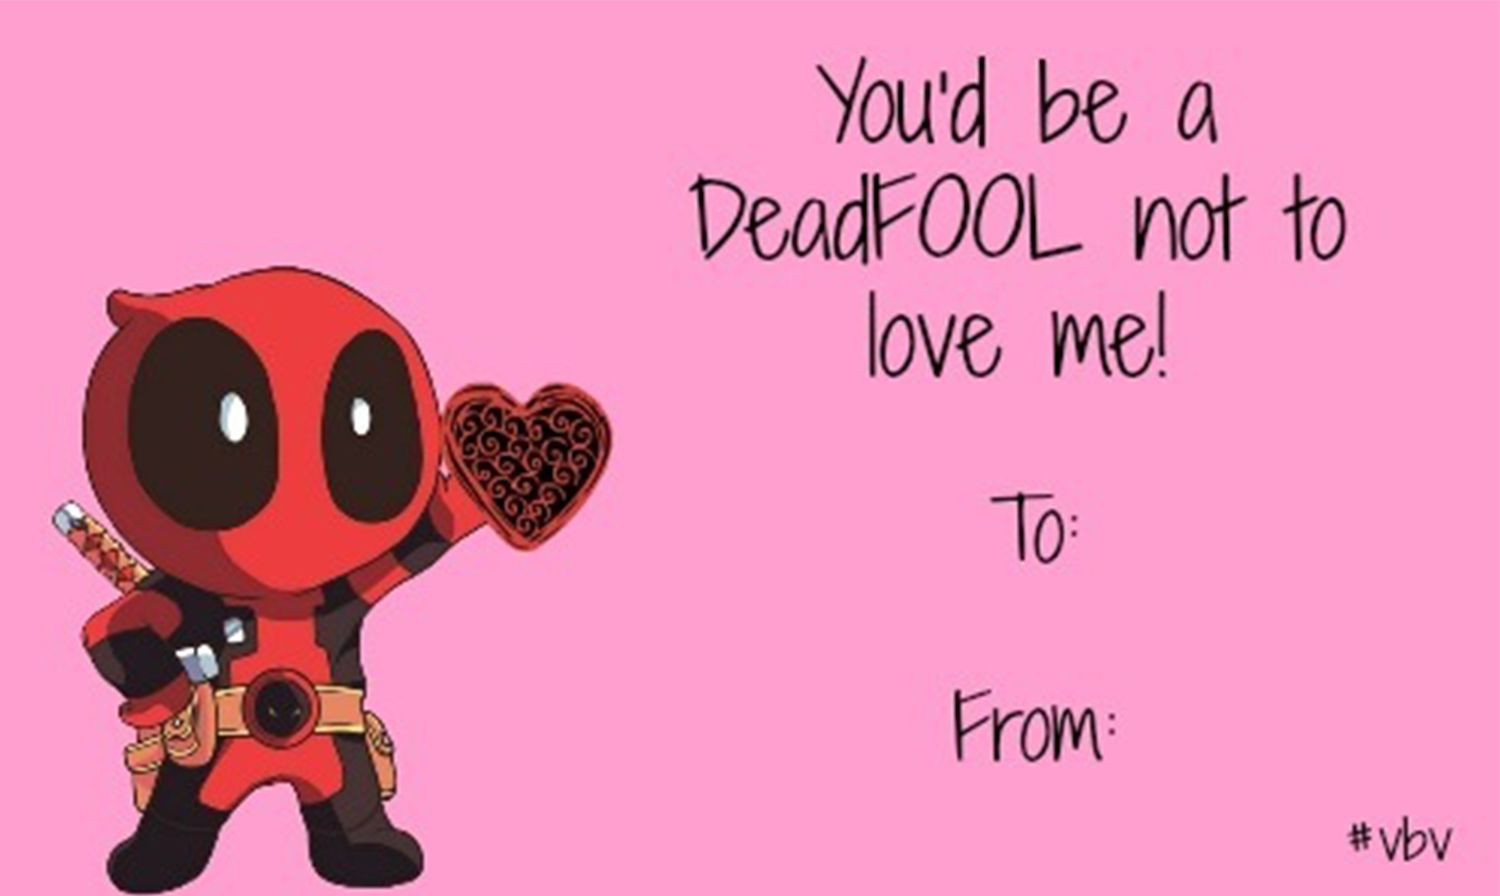 Detail Deadpool Valentines Day Cards Nomer 18